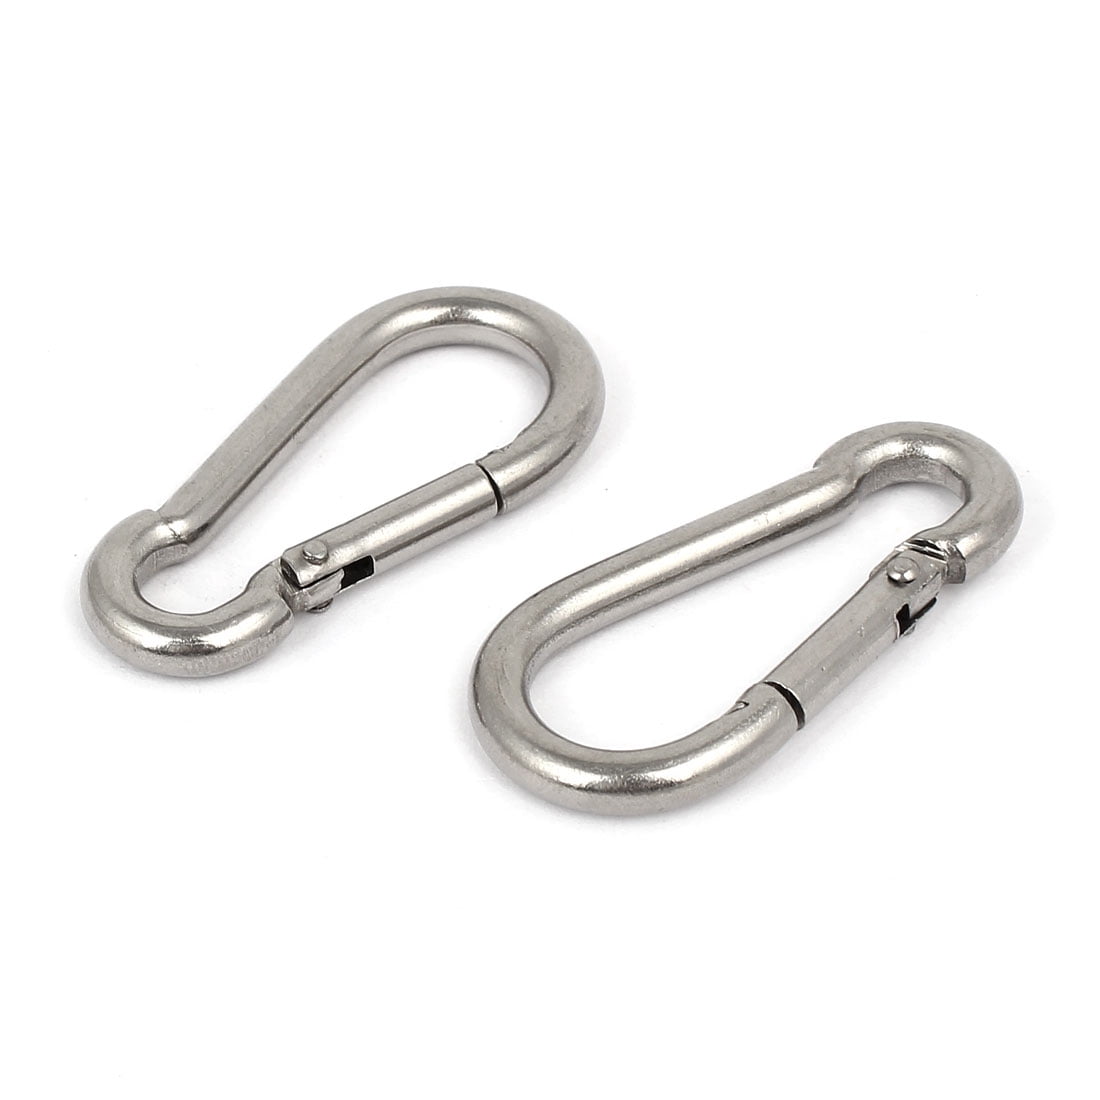 50mm Steel Carabiner Small Spring Clip Snap Clasp Hook  For Dog Leash Camping 